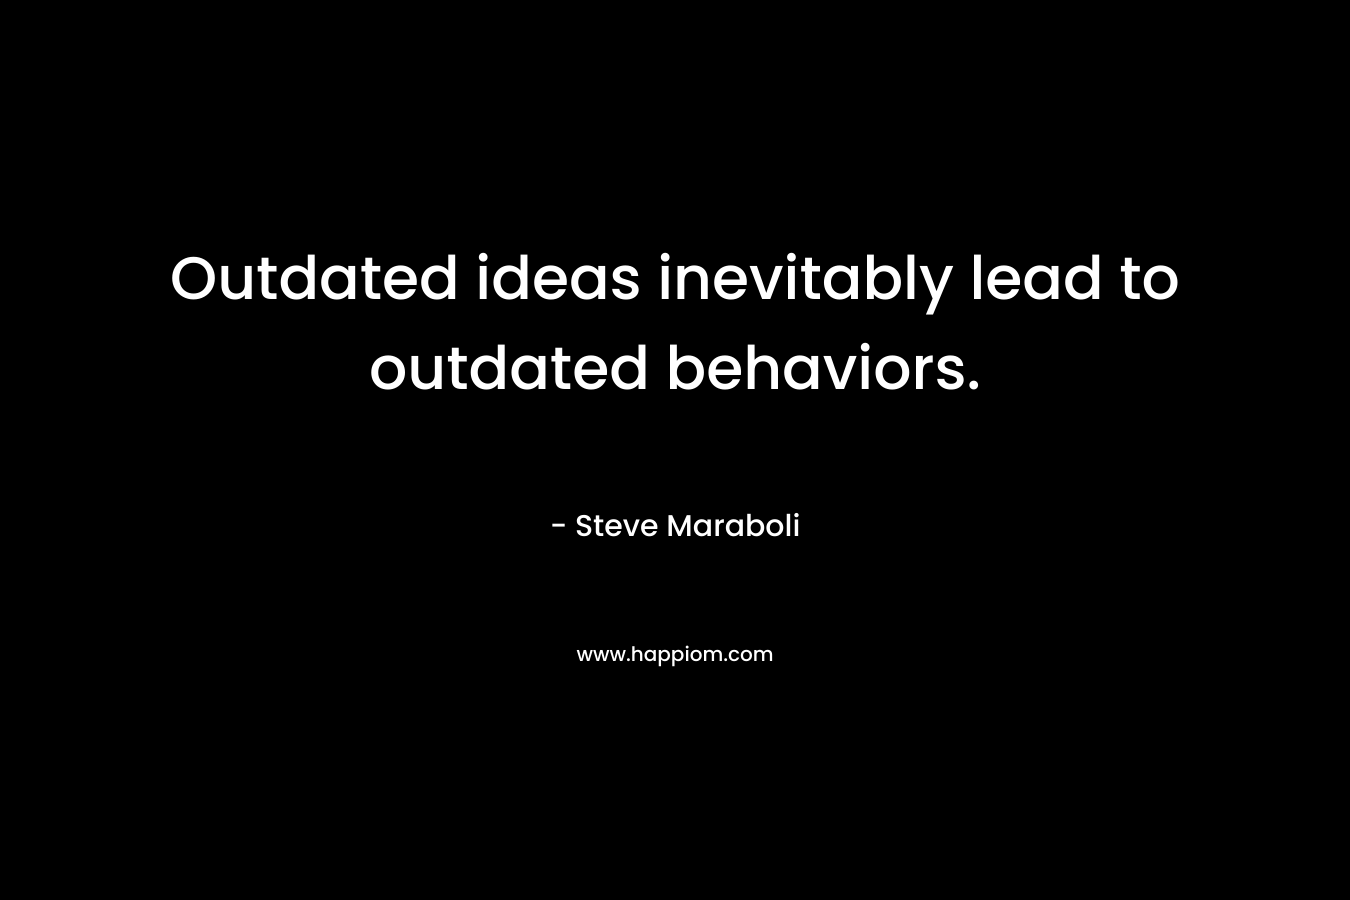 Outdated ideas inevitably lead to outdated behaviors. – Steve Maraboli